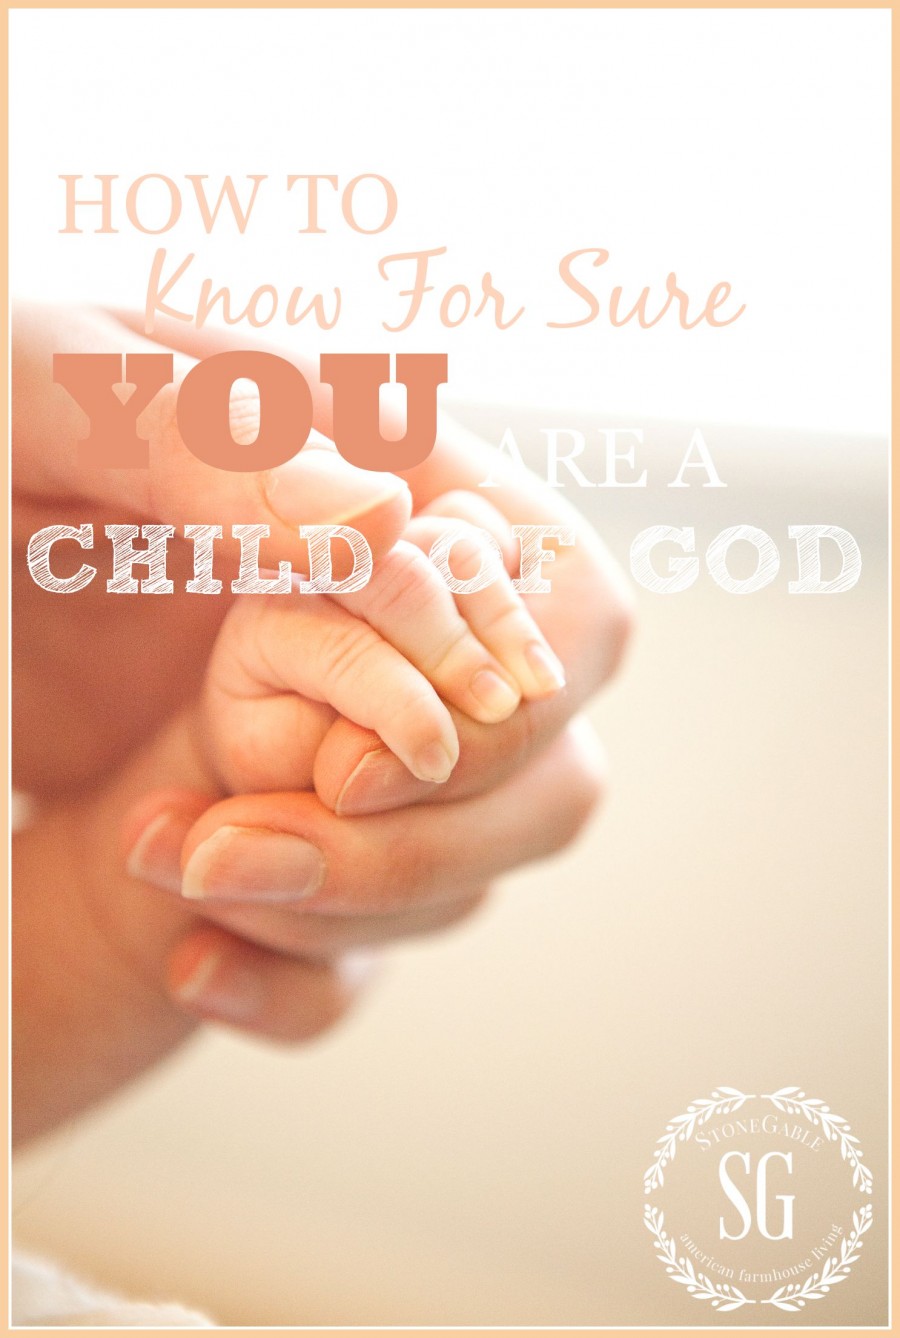 HOW TO KNOW FOR SURE YOU ARE A CHILD OF GOD-stonegableblog.com